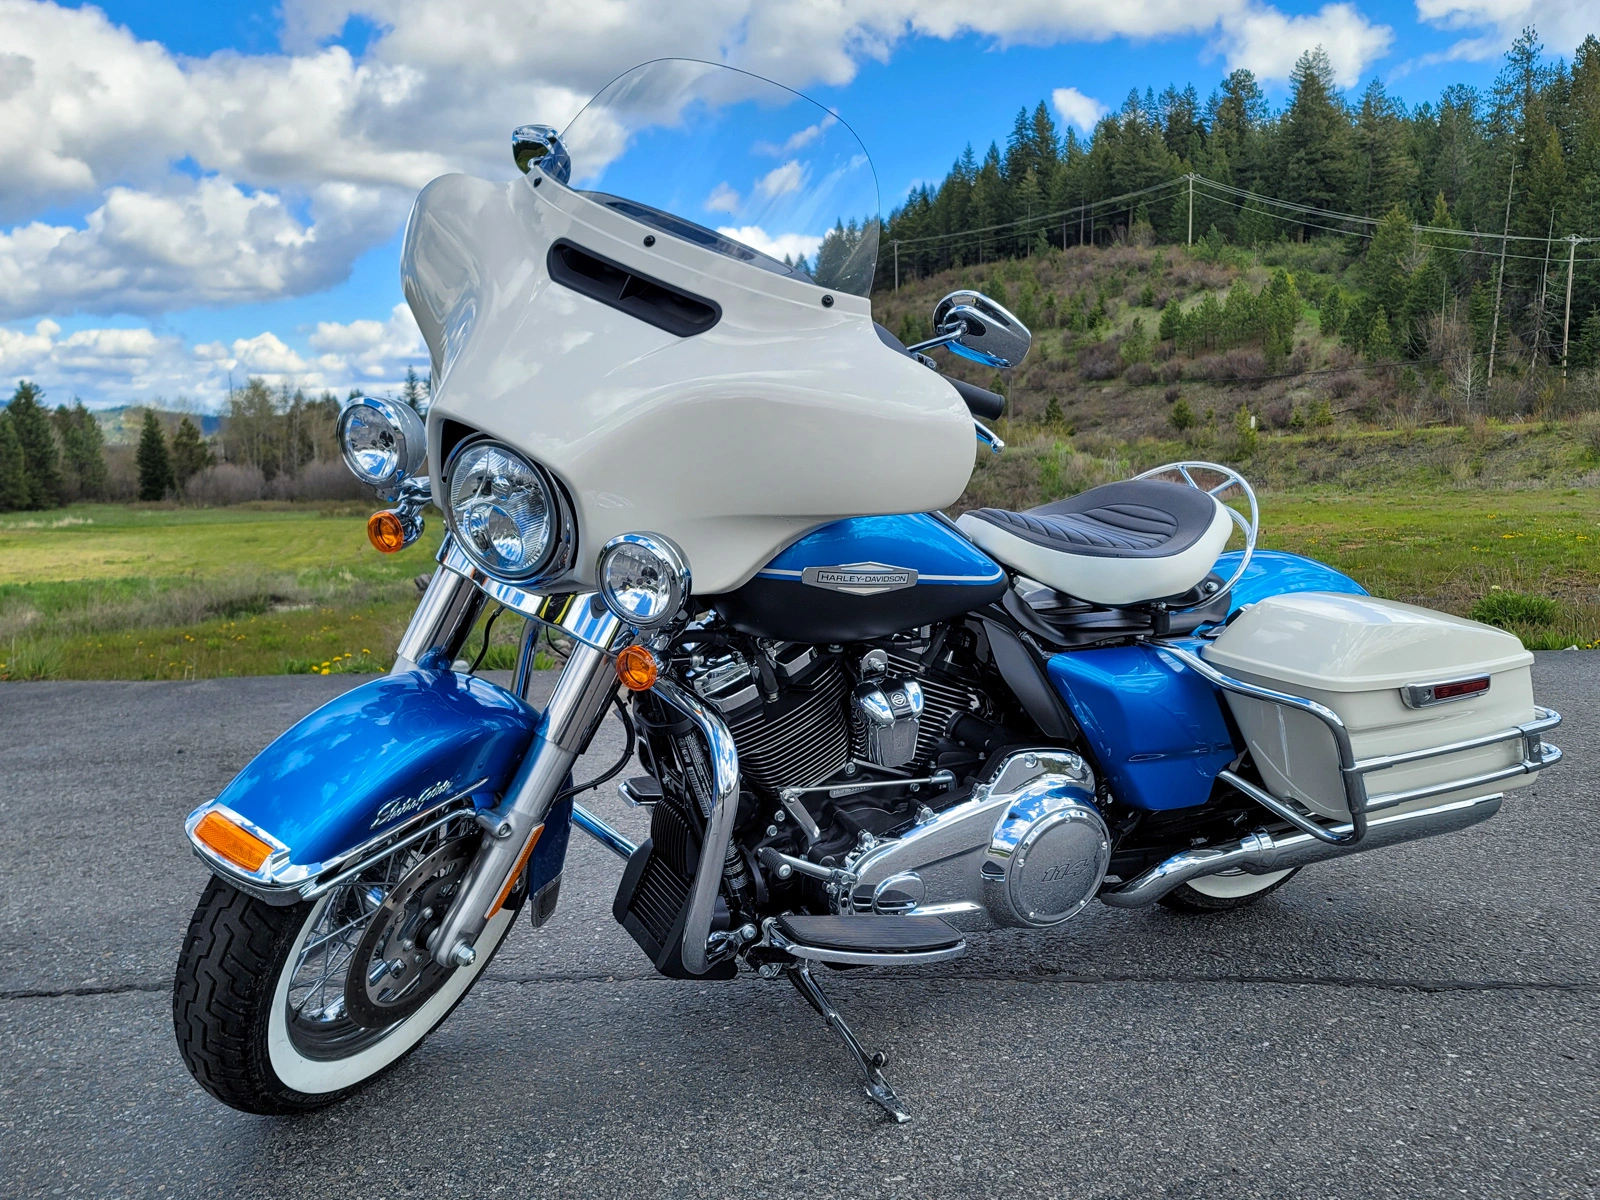 Electra Glide - Style and Design Elements popular